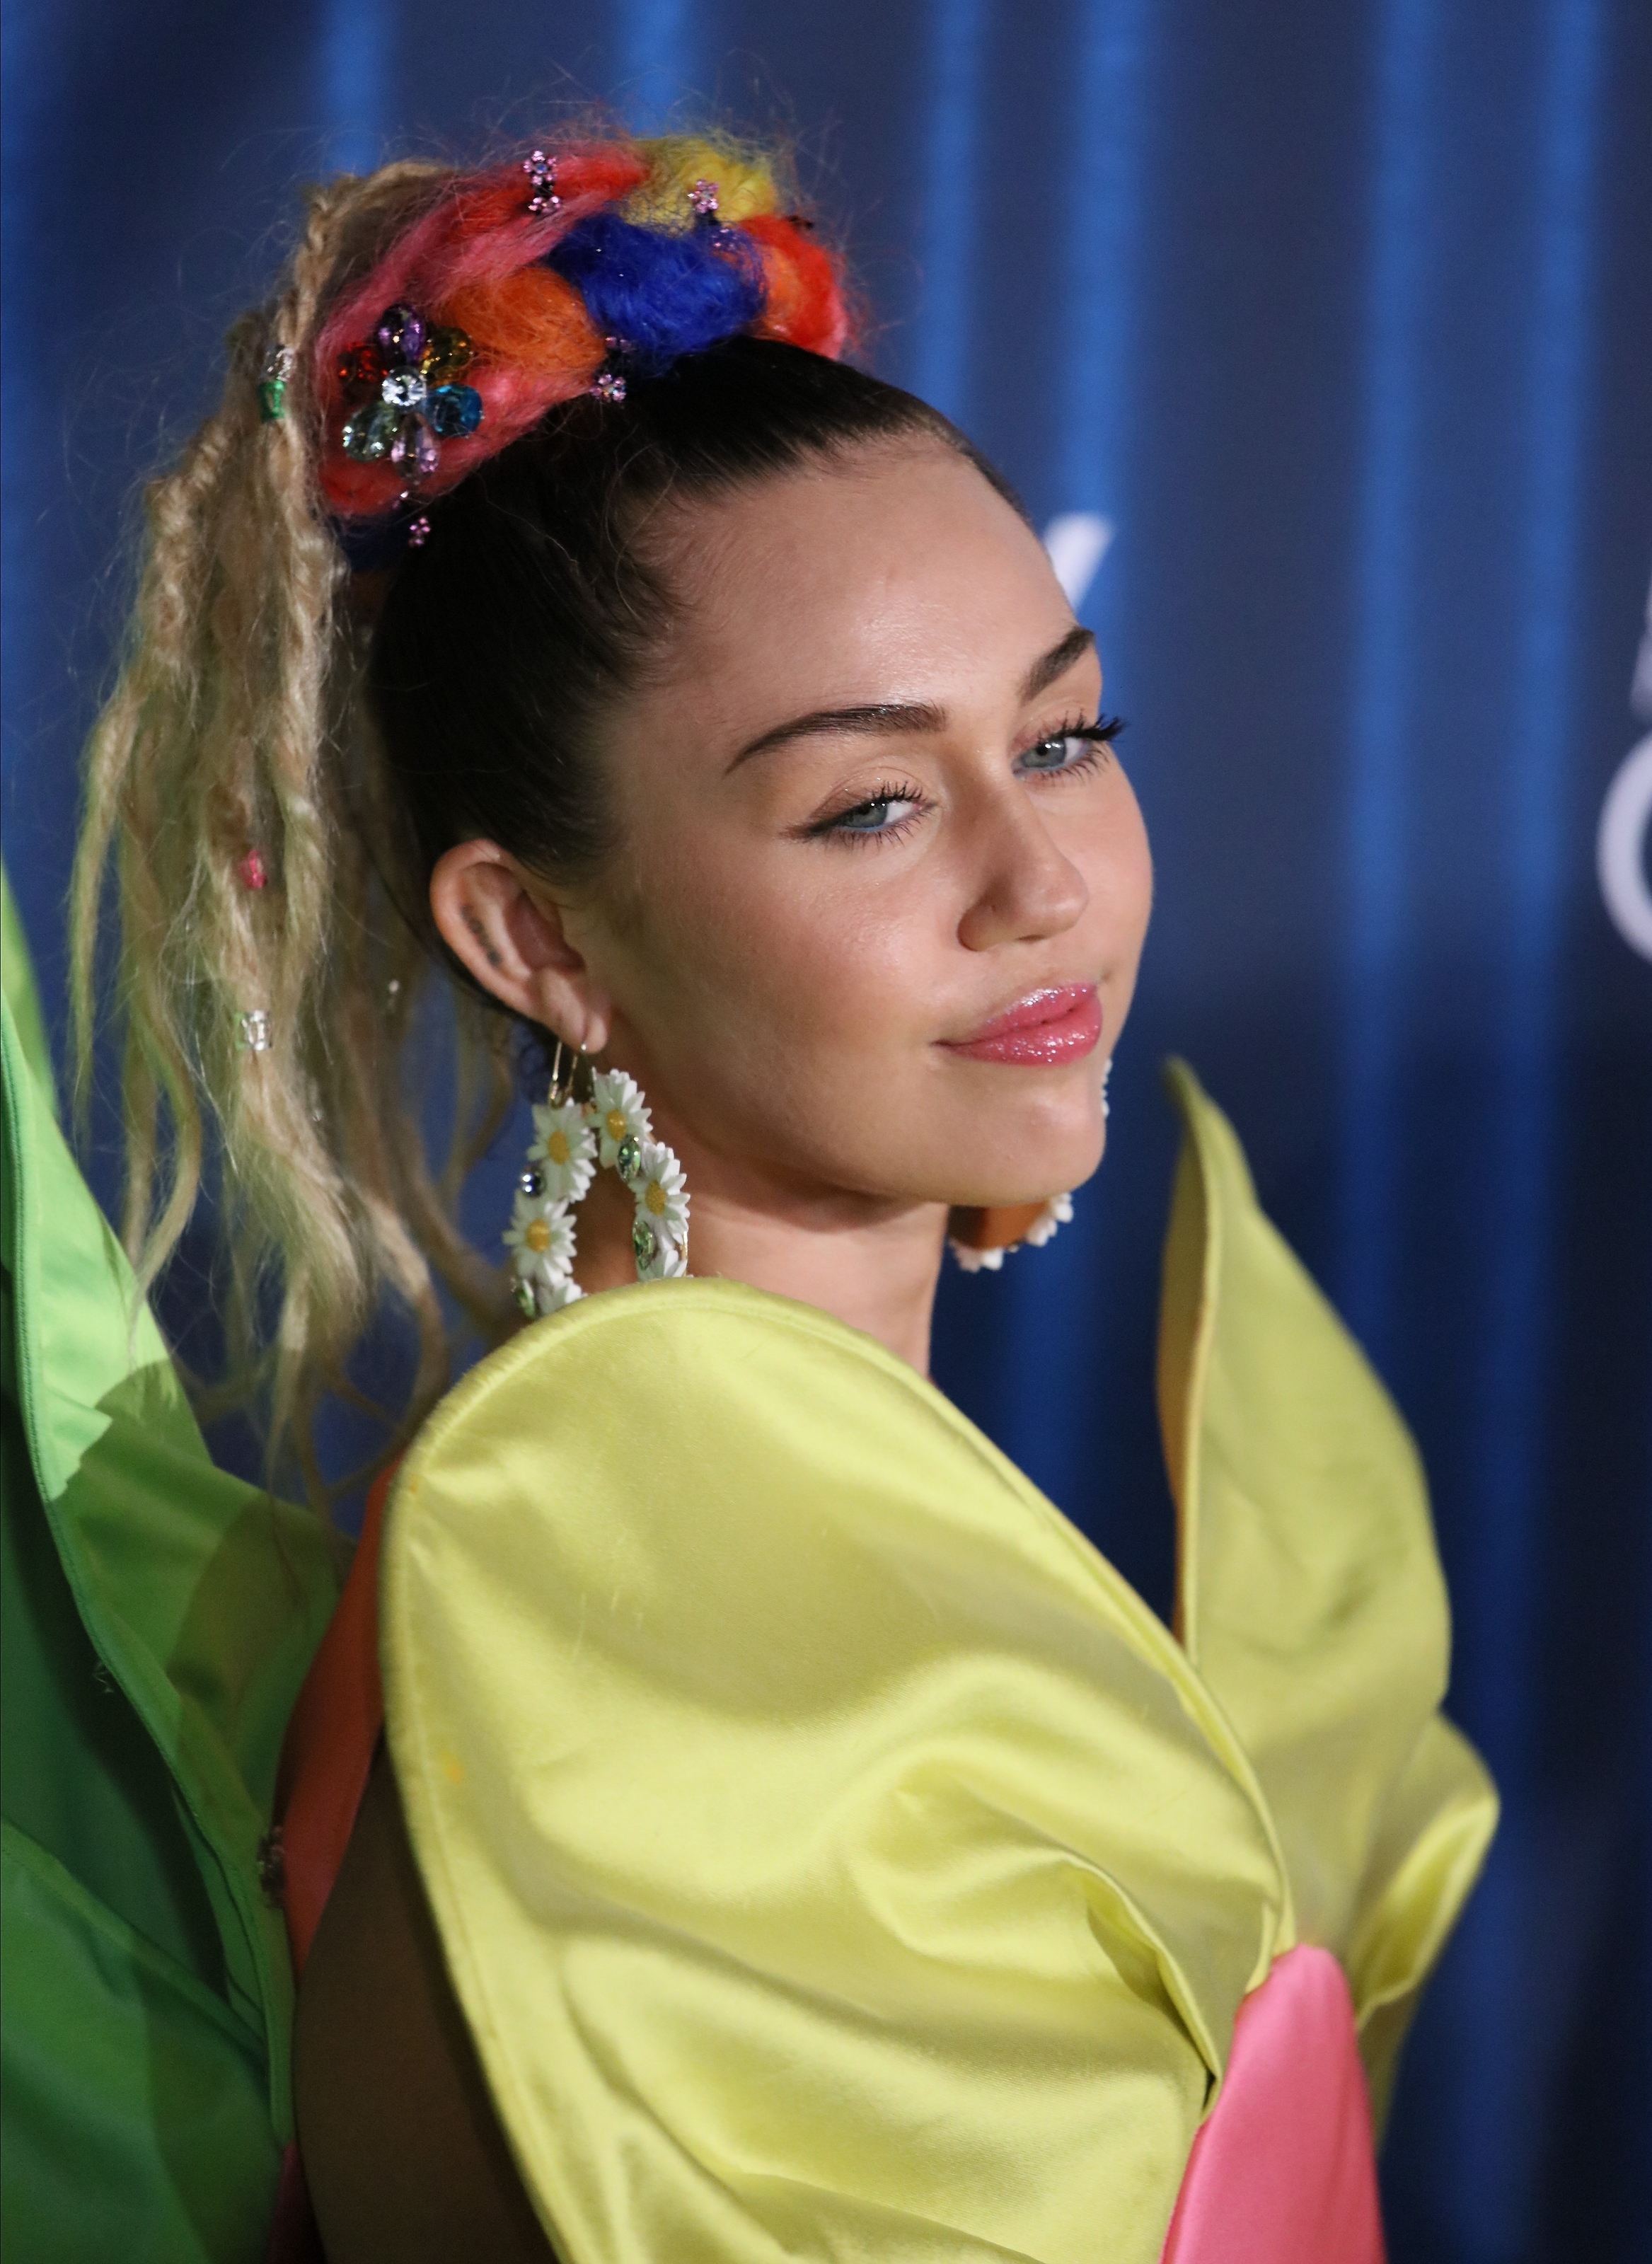 Close-up of Miley in a colorful outfit